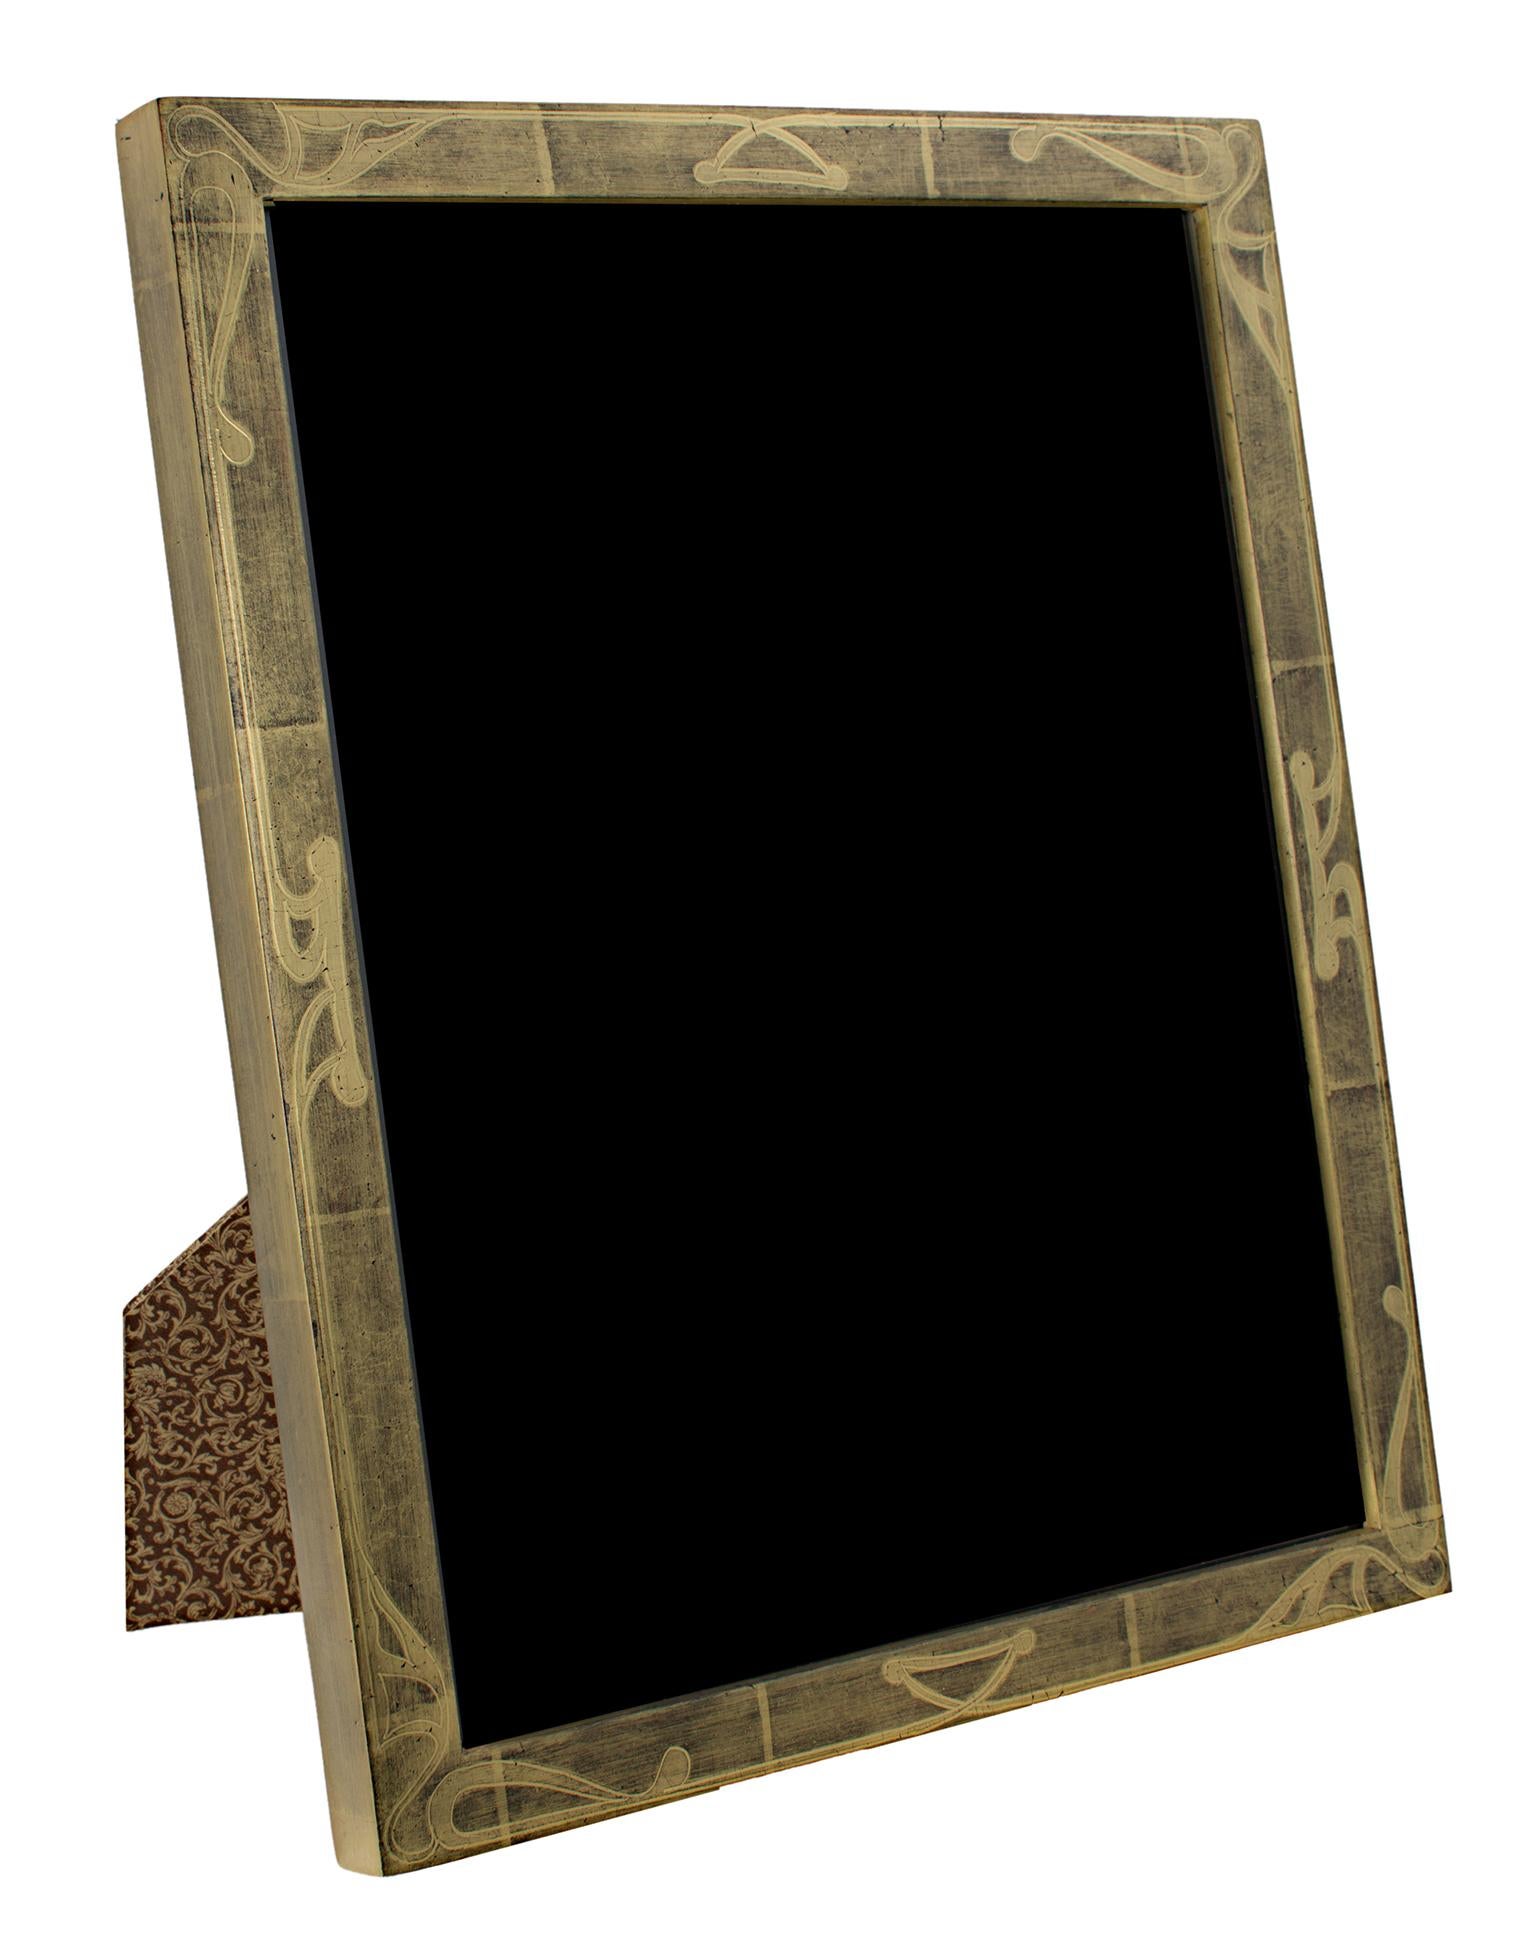 "Handmade 22K Gold Leaf Photo Frame, " Wood 8 x 10 Frame made in Romania - Art by Unknown